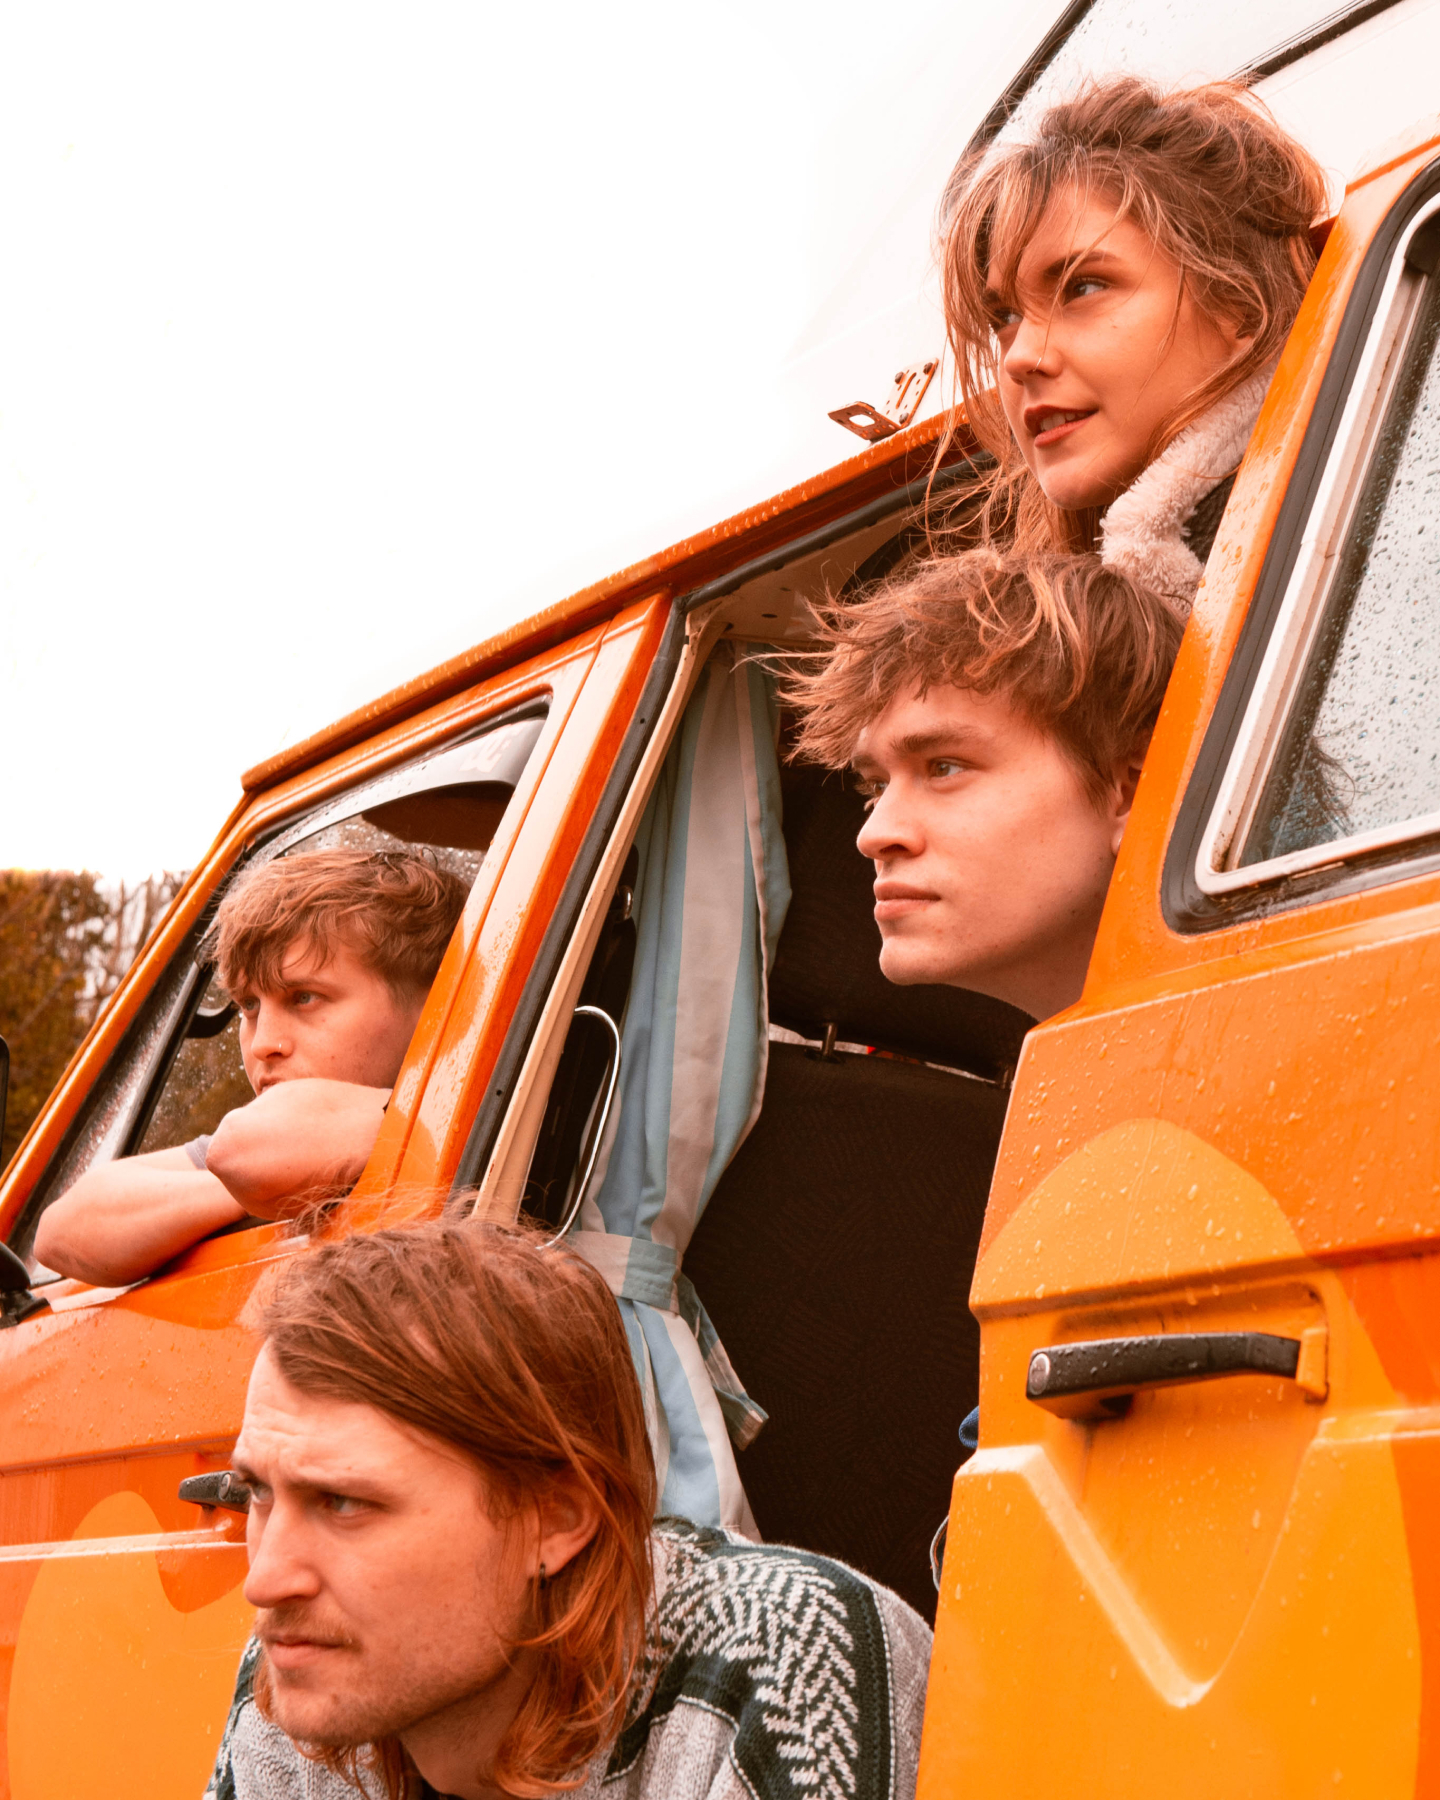 The band 'HUNNY BUZZ' looking out of a car.